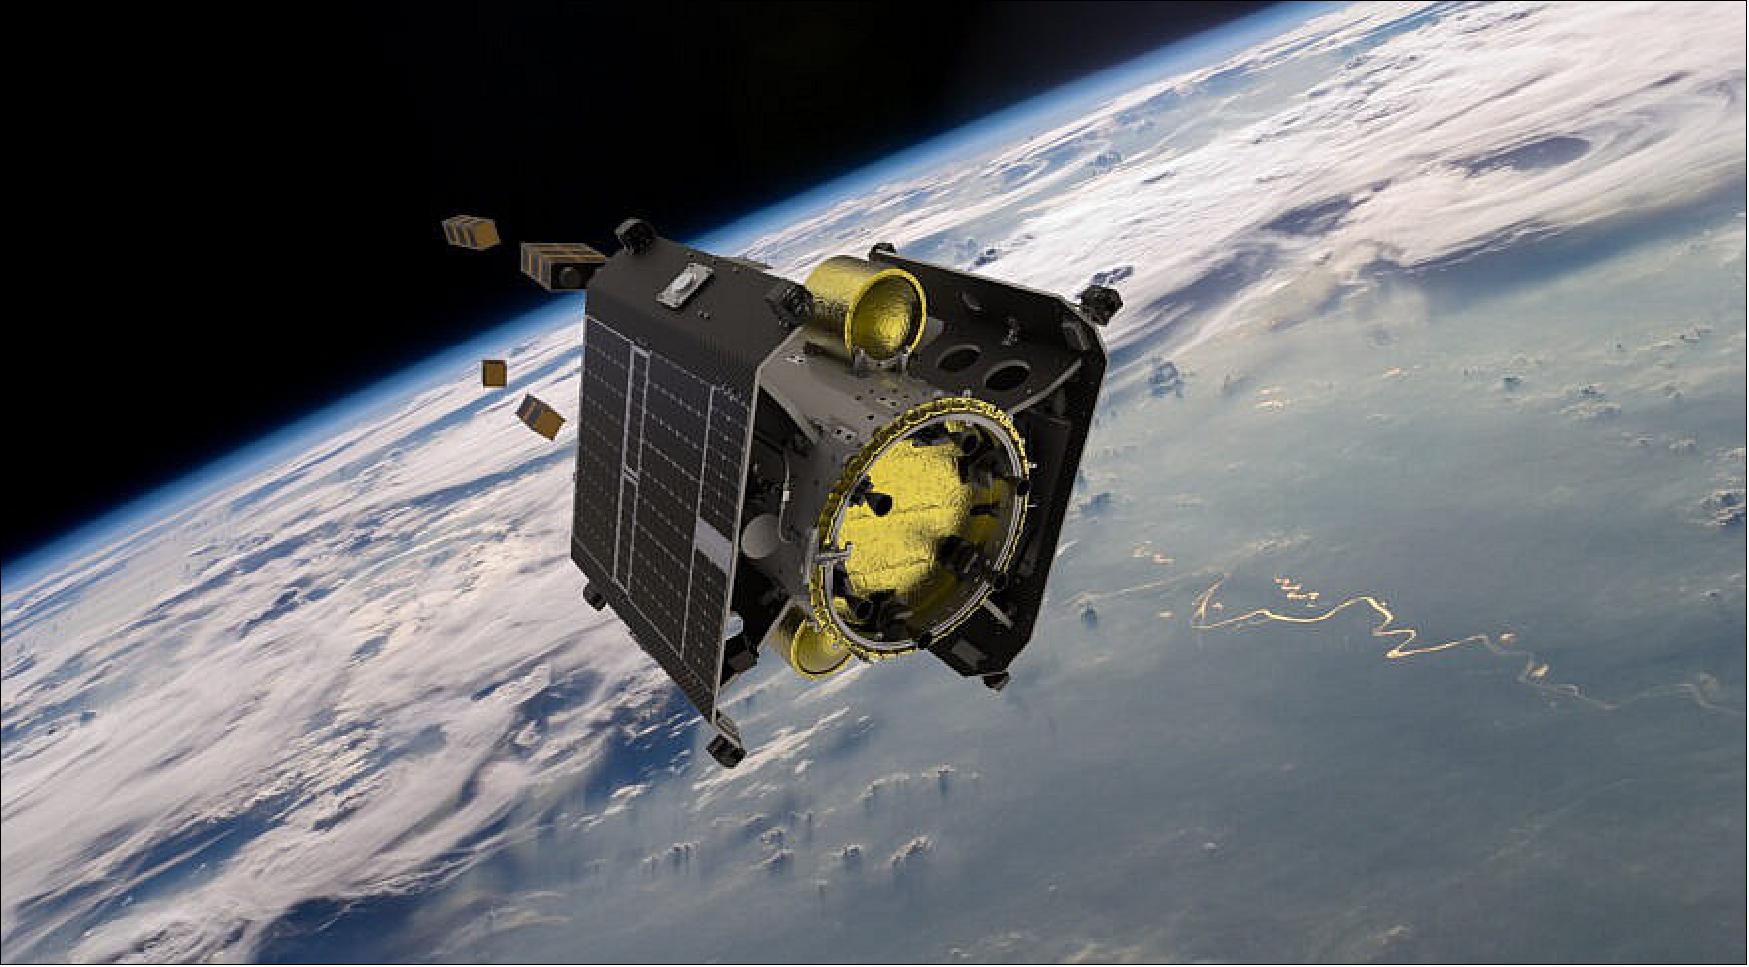 Figure 3: D-Orbit offers in-space transportation services with its ION Satellite Carrier (image credit: D-Orbit)